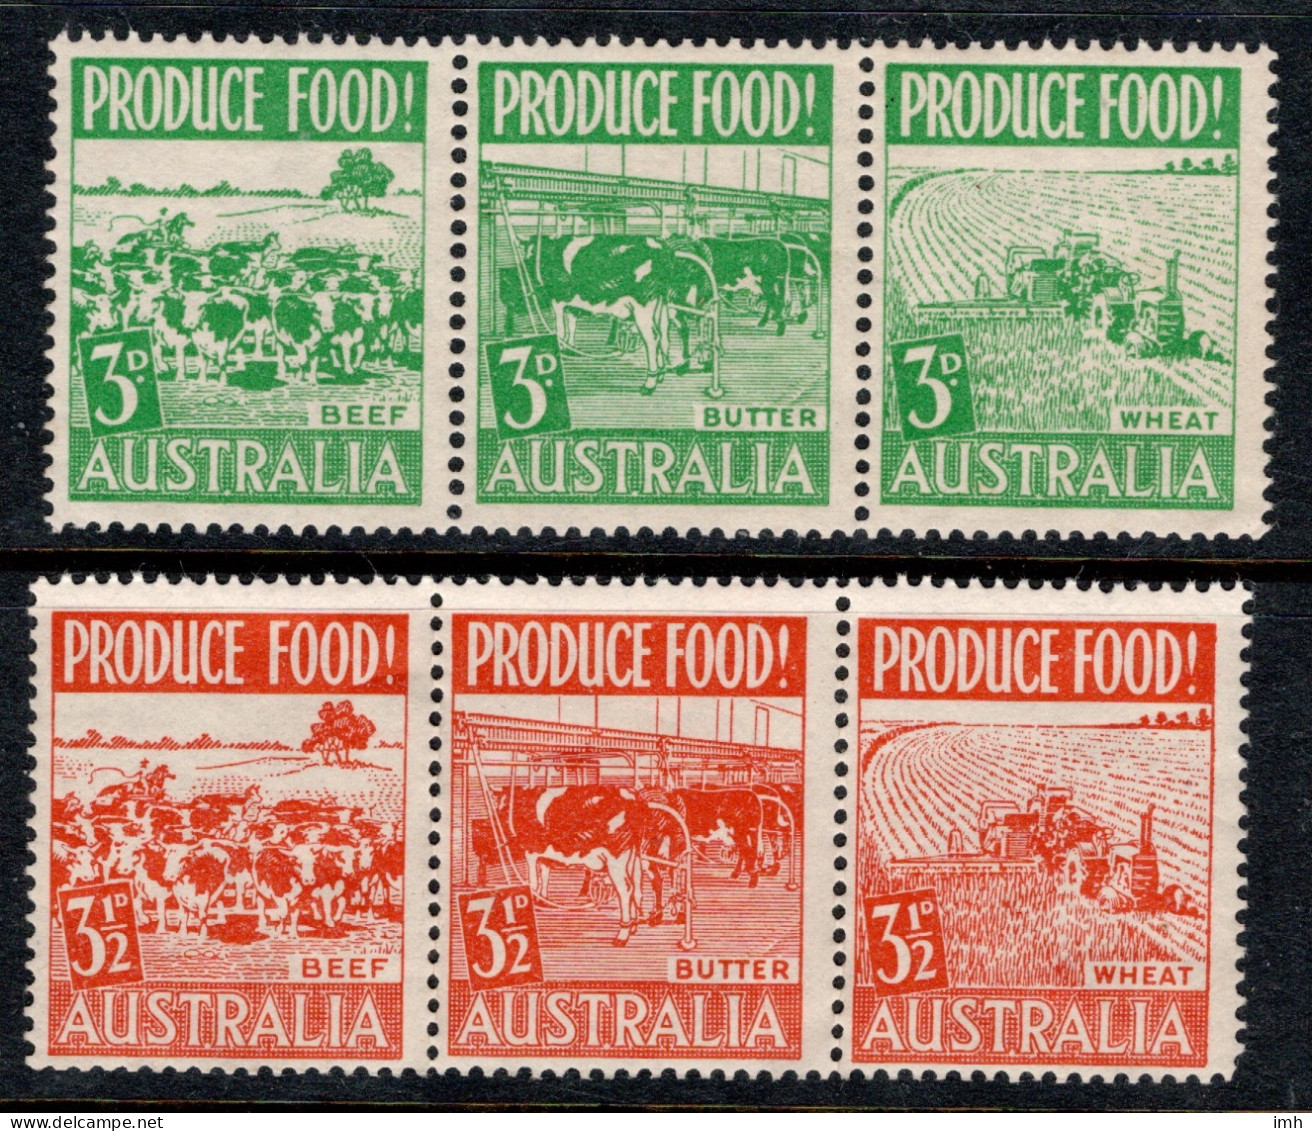 1953 Australia SG 255-260 Produce Food In Strips Of Three Complete Set , Mint Unhinged MUH Cat £3.00 - Mint Stamps